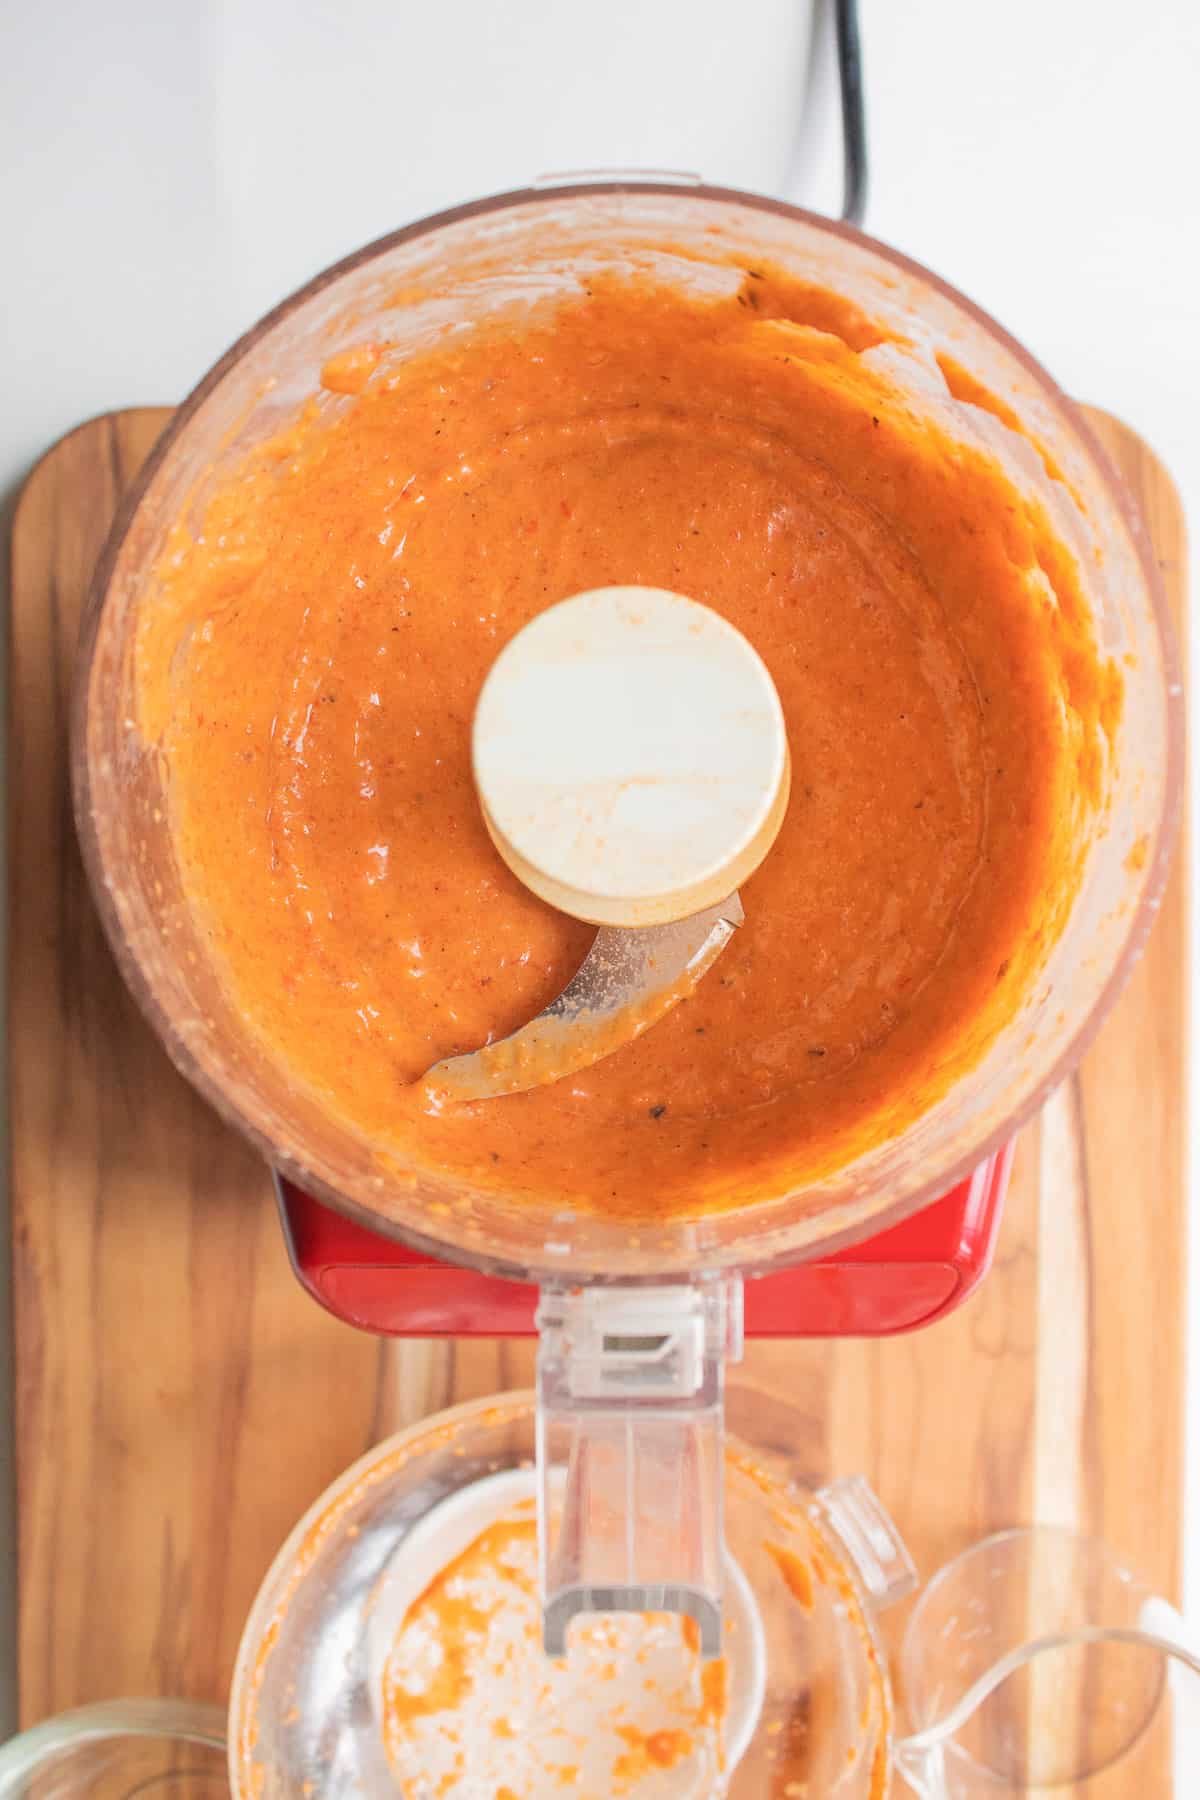 The bright orange-red processed salad dressing sits in the bottom of the food processor bowl.